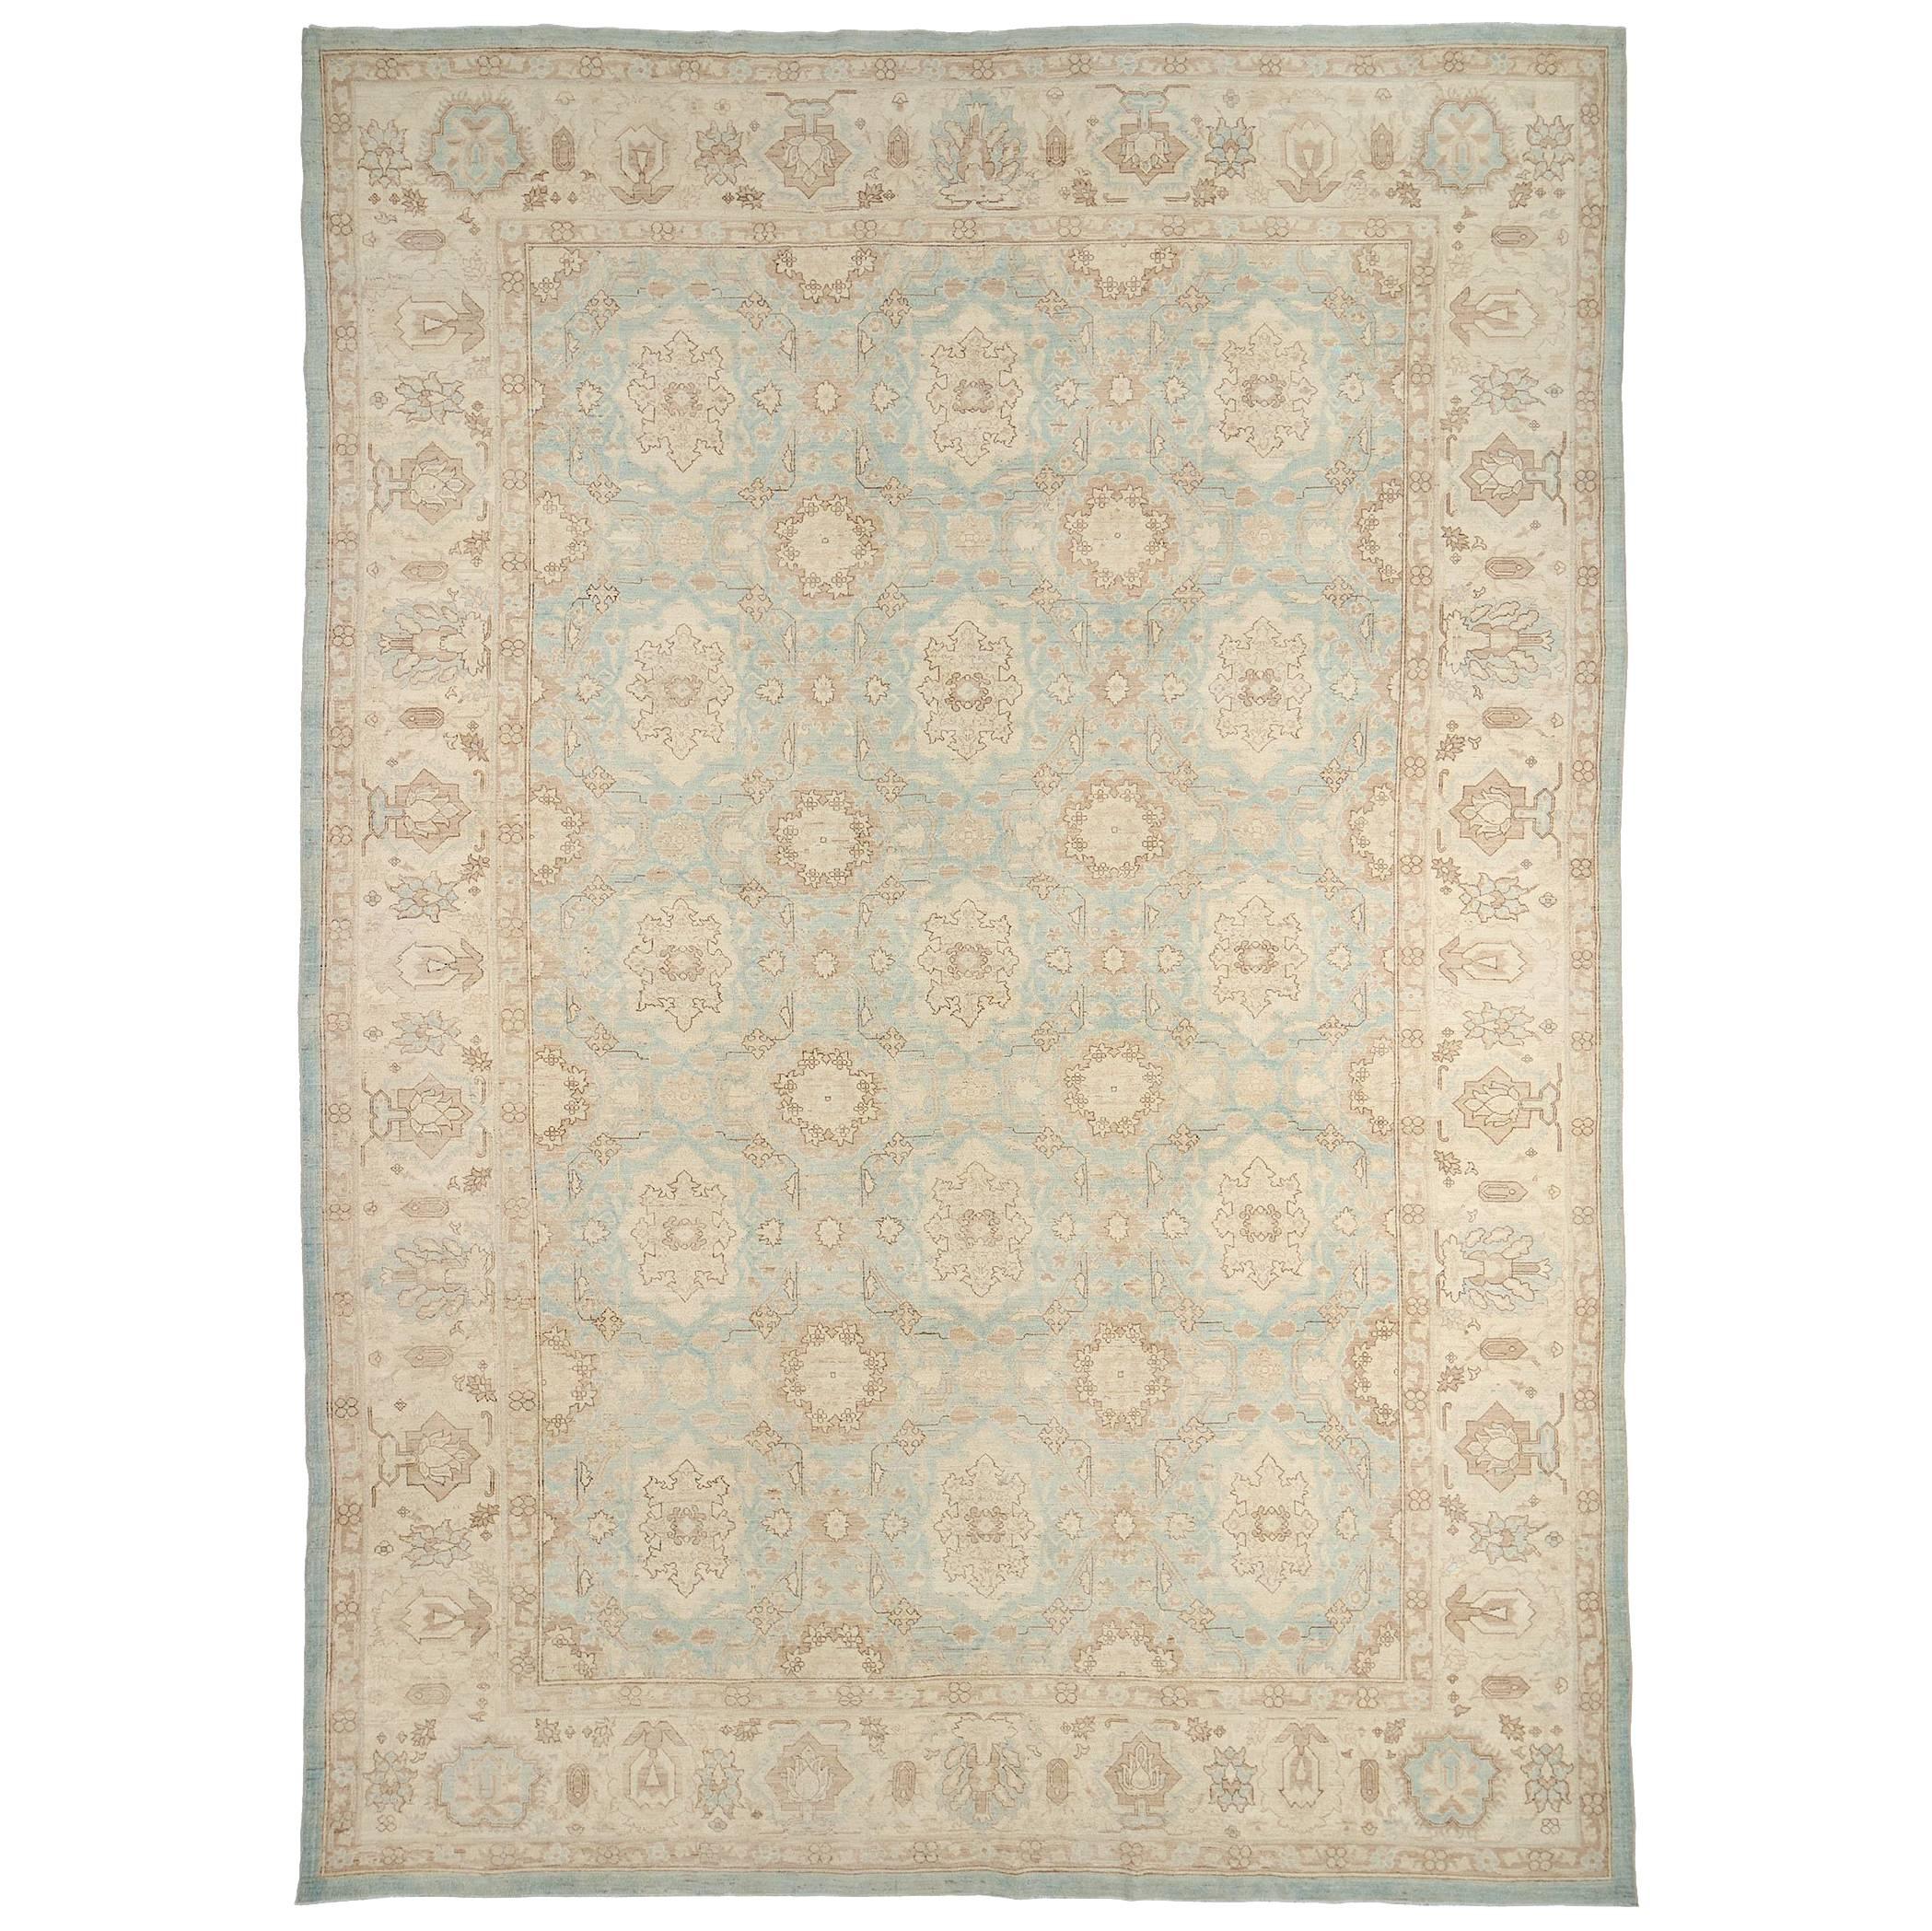 Contemporary Handwoven Blue Pastel Floral Afghan Area Rug